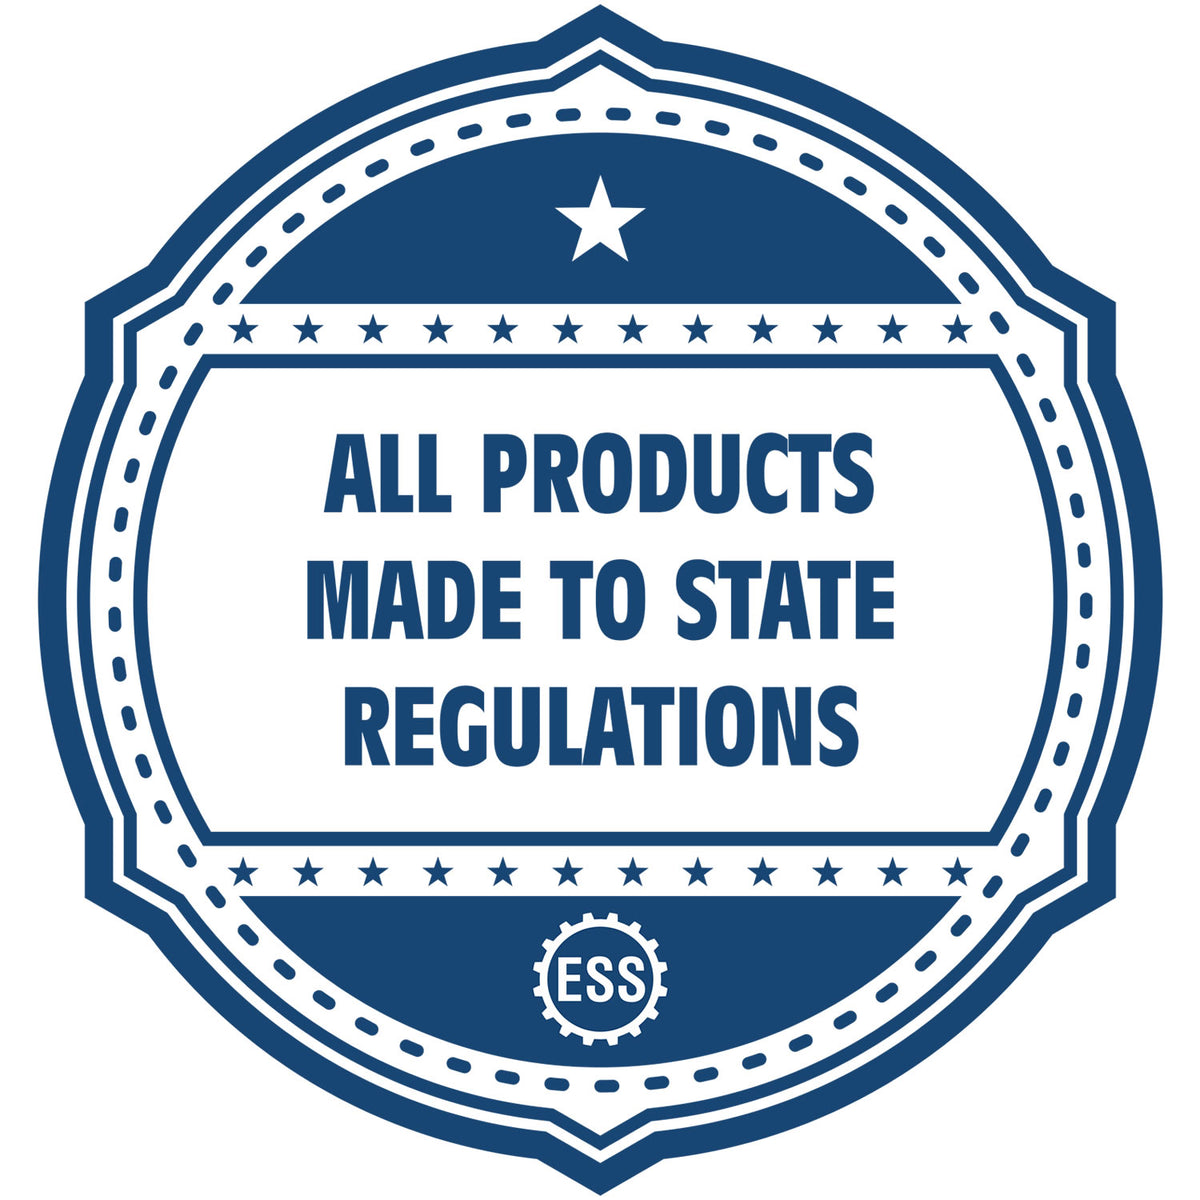 A blue icon or badge for the Gift Nebraska Landscape Architect Seal showing that this product is made in compliance with state regulations.